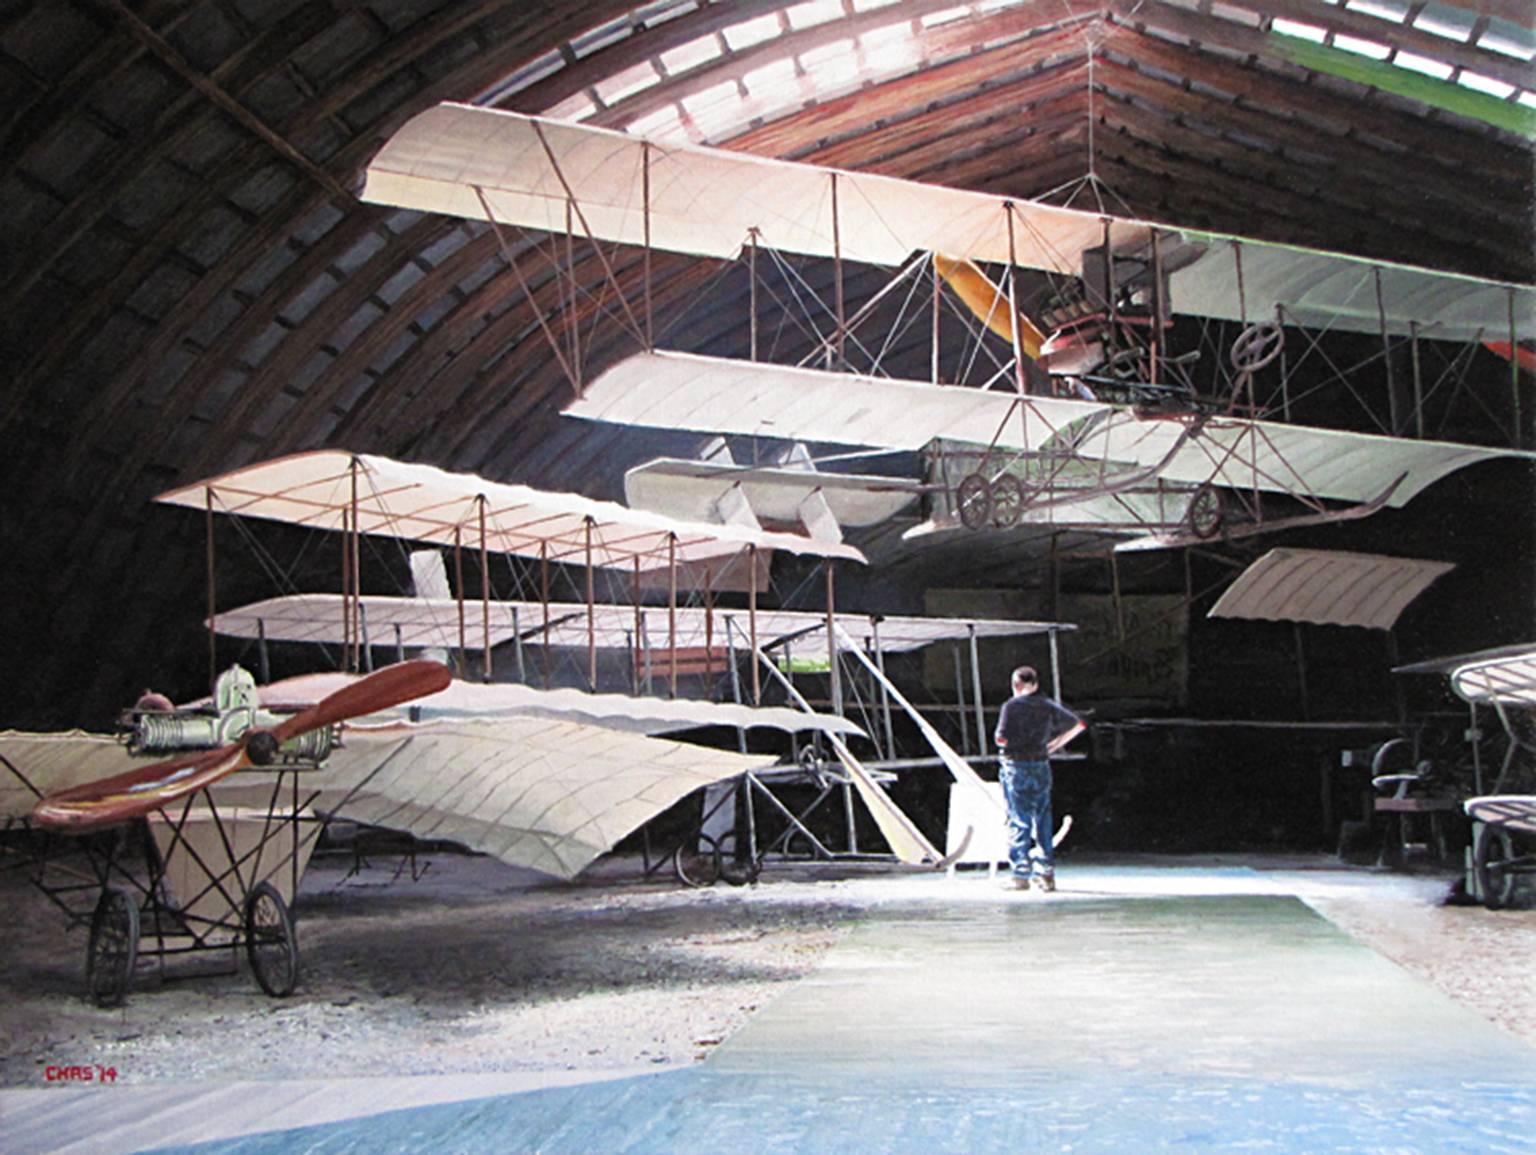 Charles Hartley Figurative Painting - Photorealist painting airplane hangar, "Residue", oil on linen